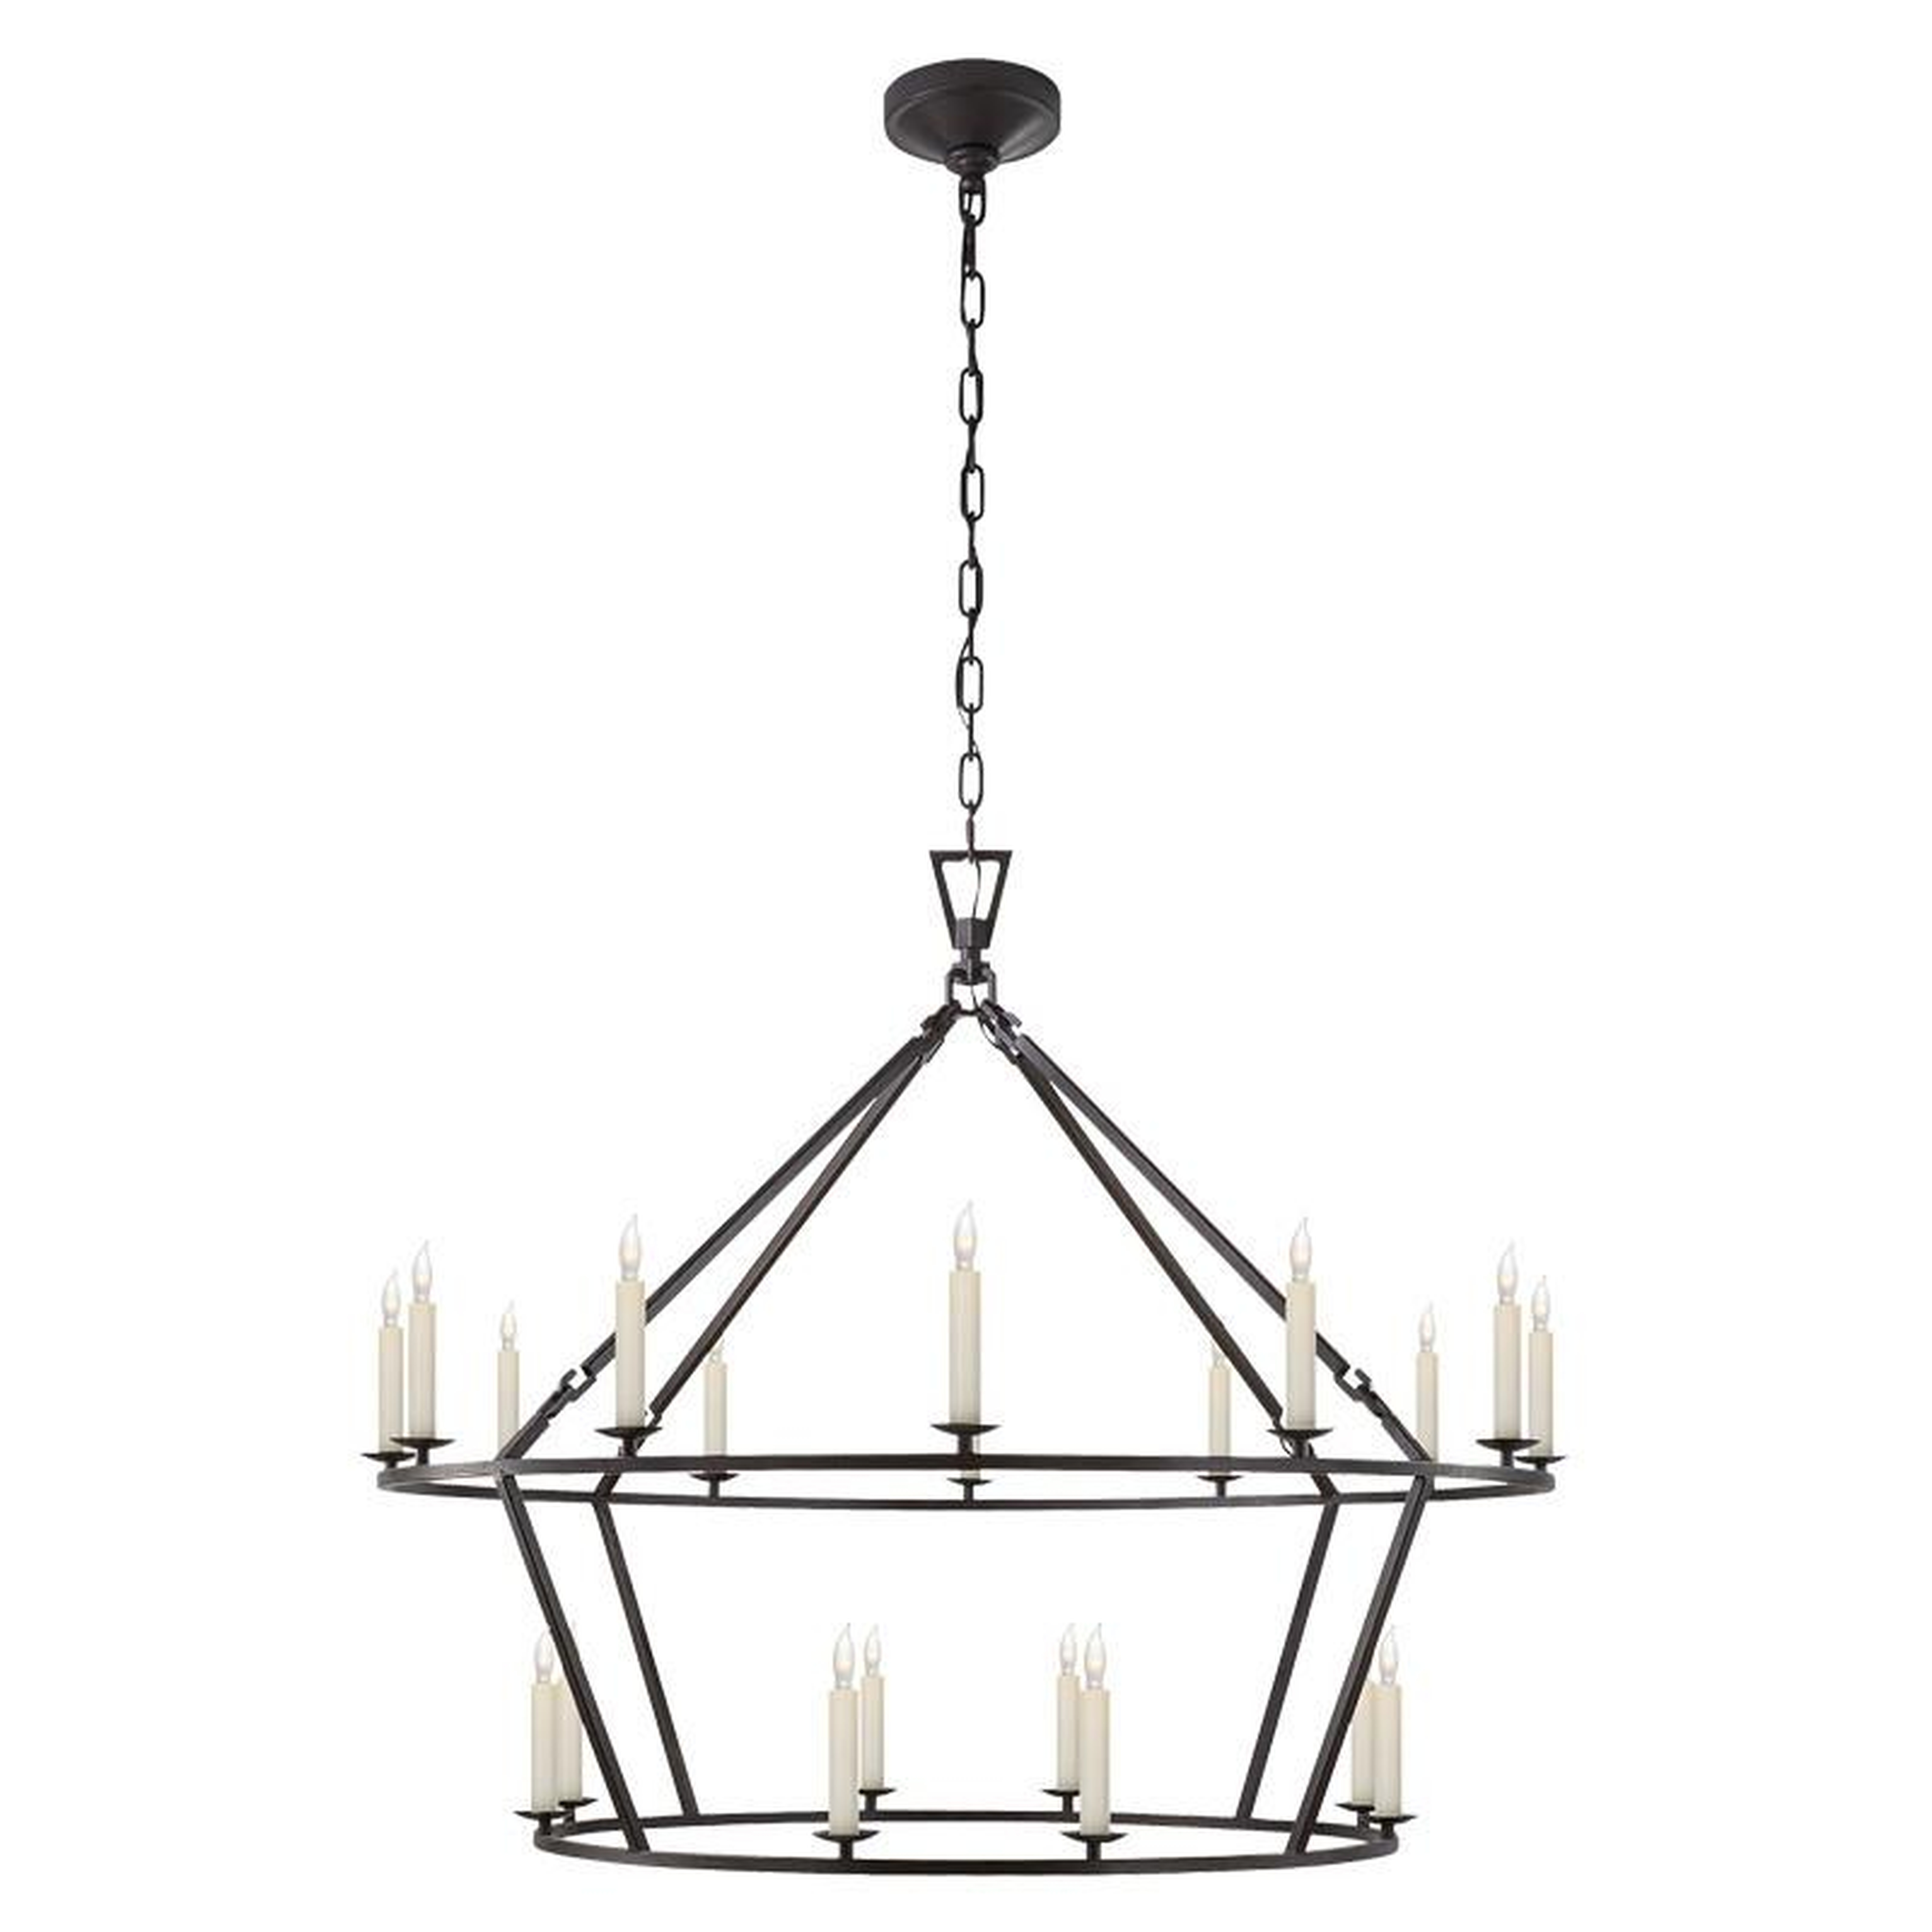 DARLANA TWO-TIERED RING LARGE CHANDELIER - AGED IRON - McGee & Co.